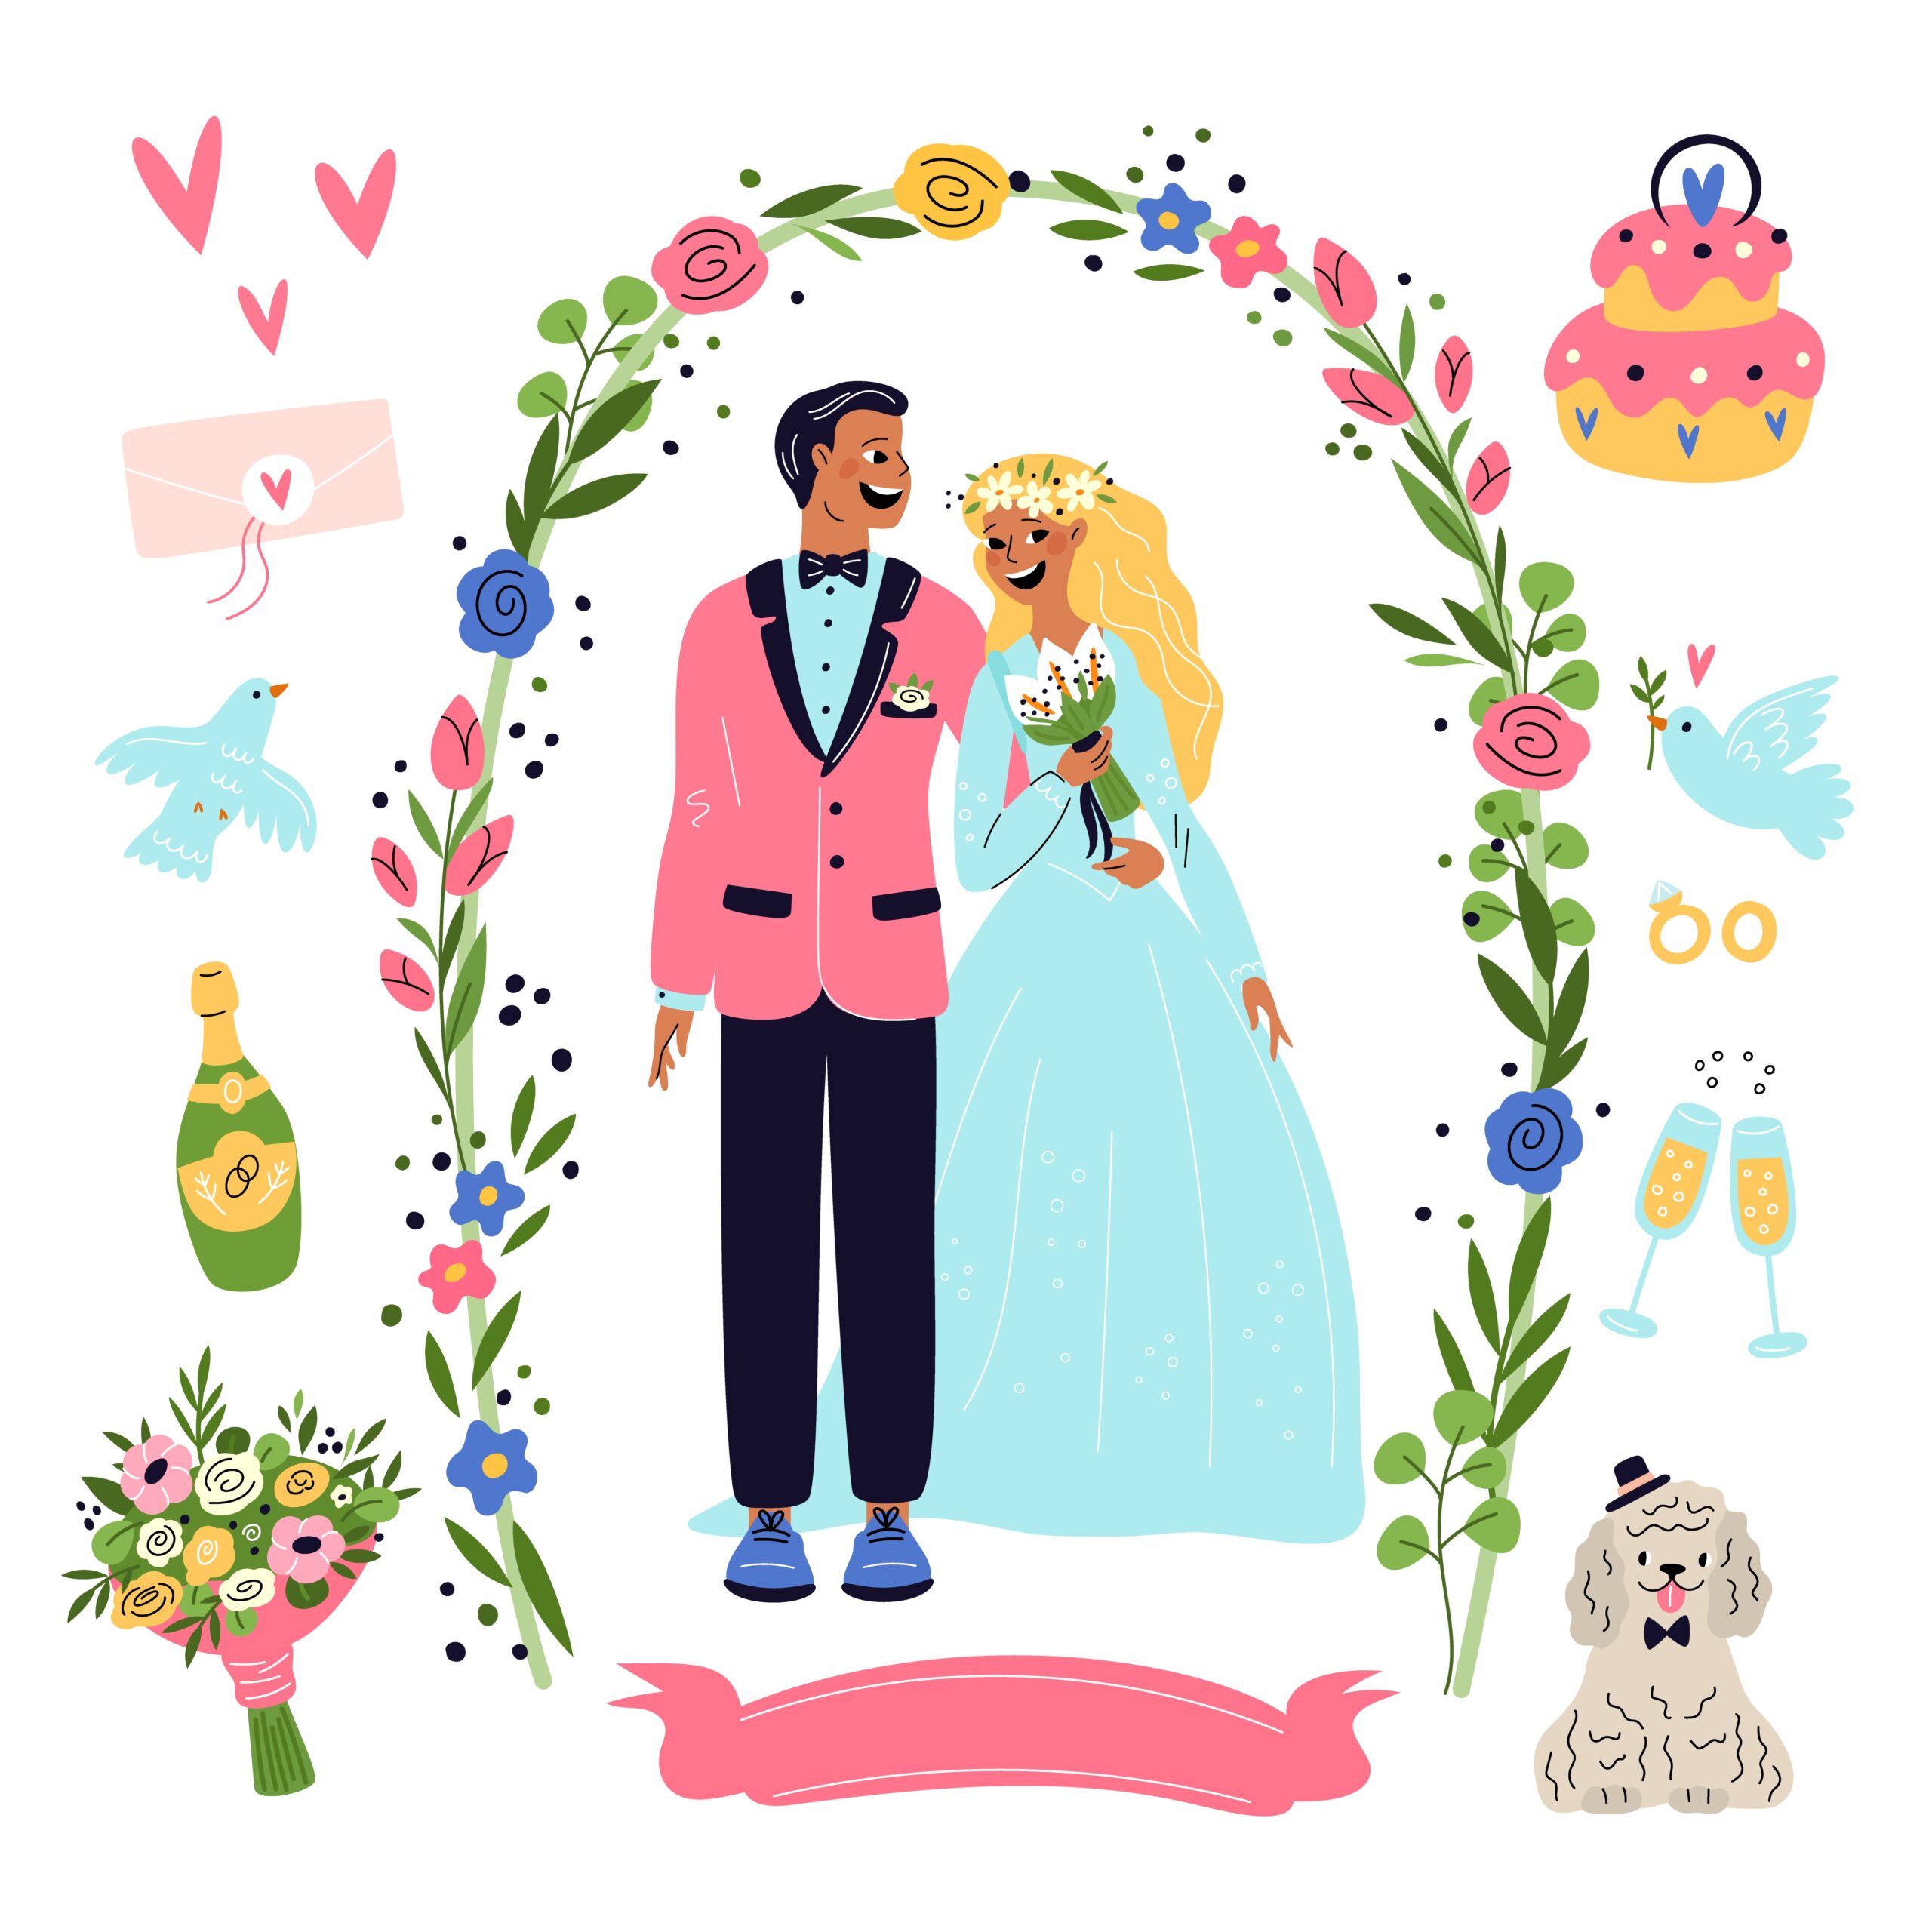 2209 m11 i022 n014 s c15 cartoon wedding elements happy characters romantic couple in ceremonial outfits celebration objects and accessories garis scaled